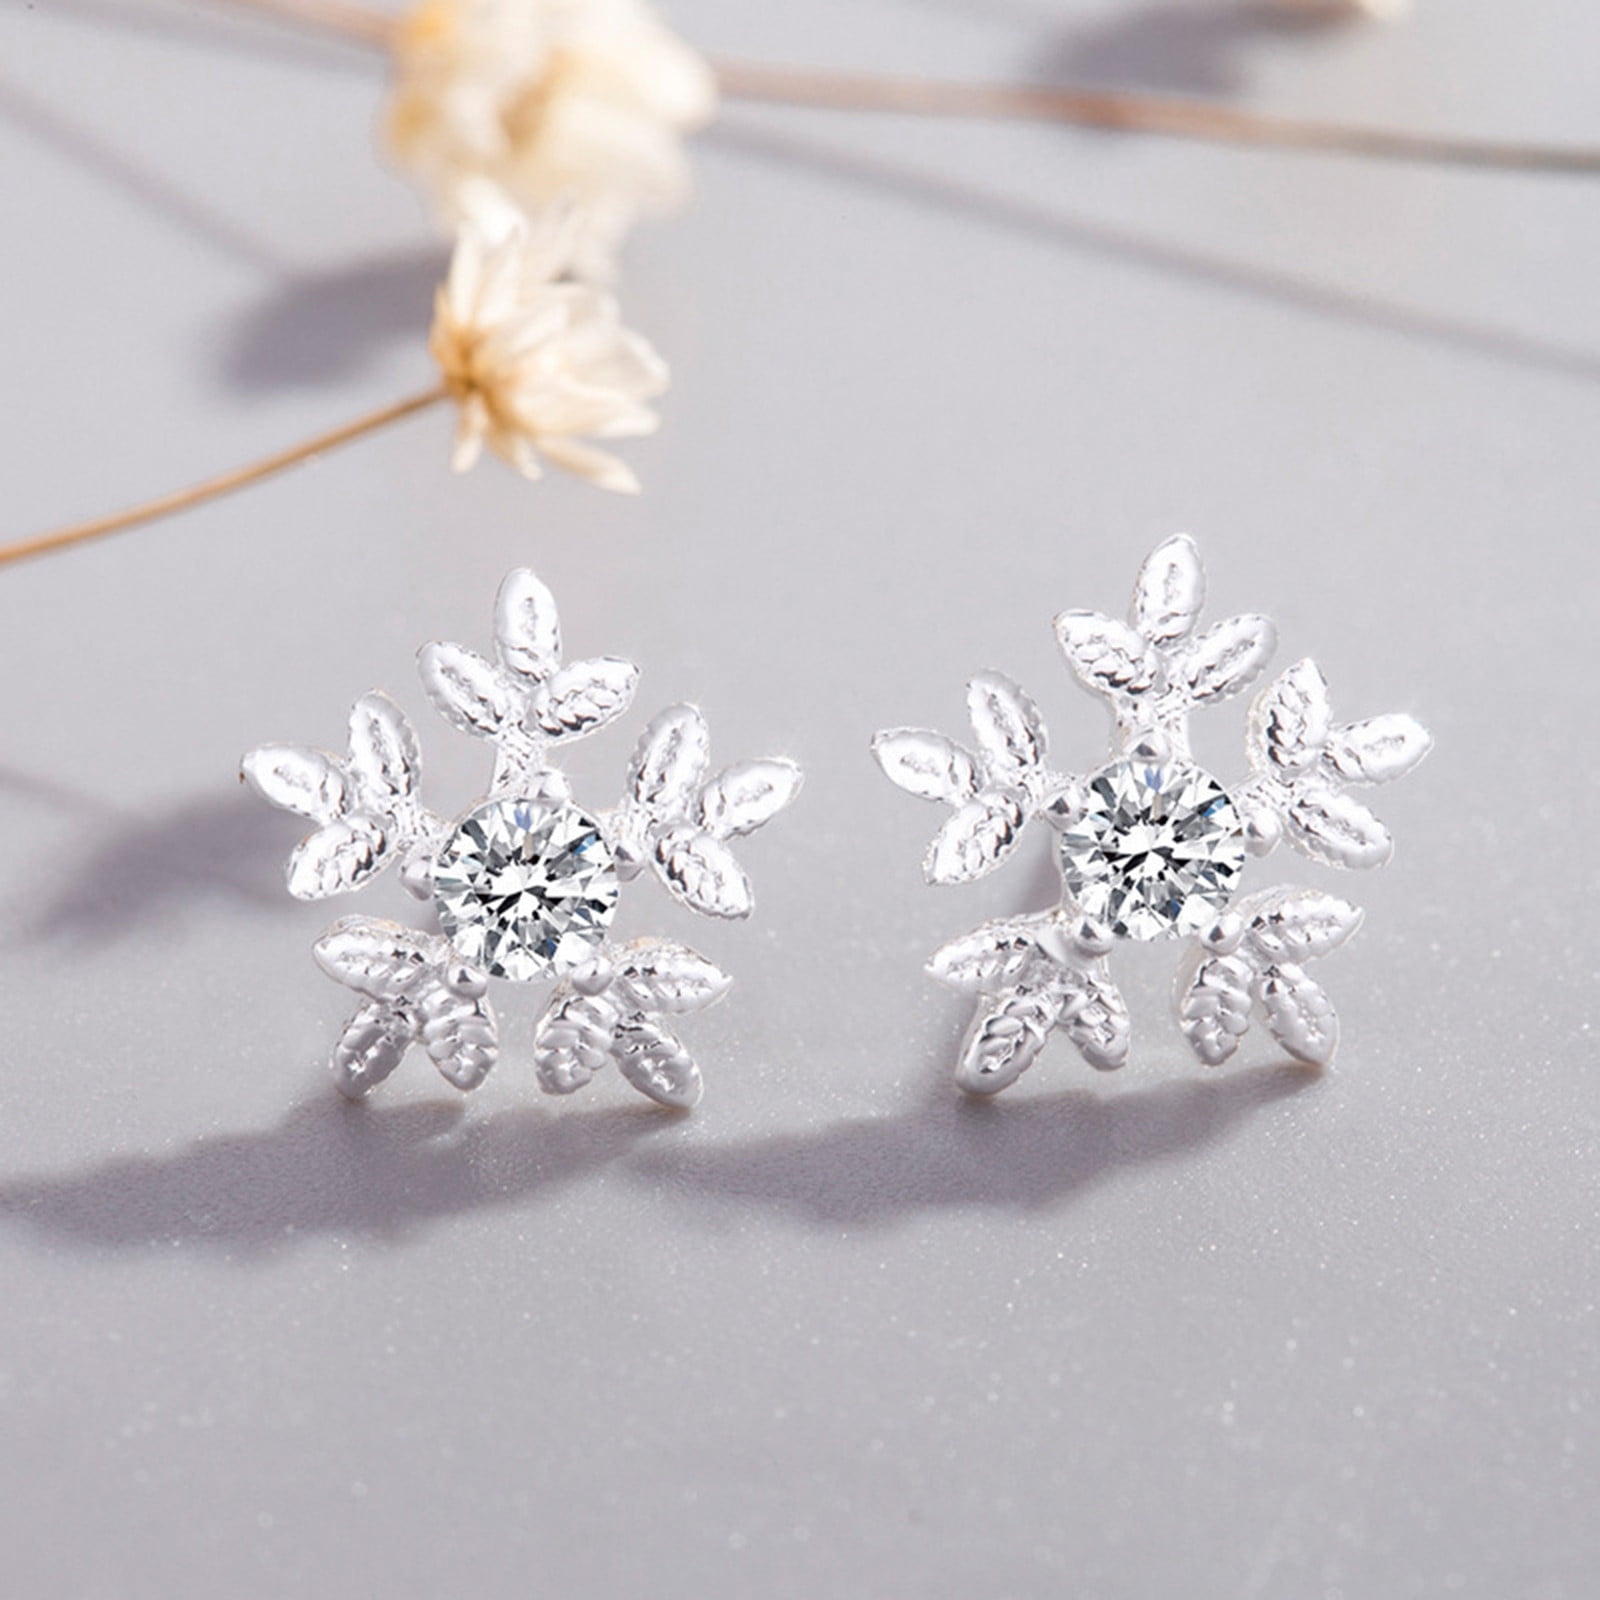 Silver or Gold..You choose.. Details about   Sparkling snowflake earrings; White 